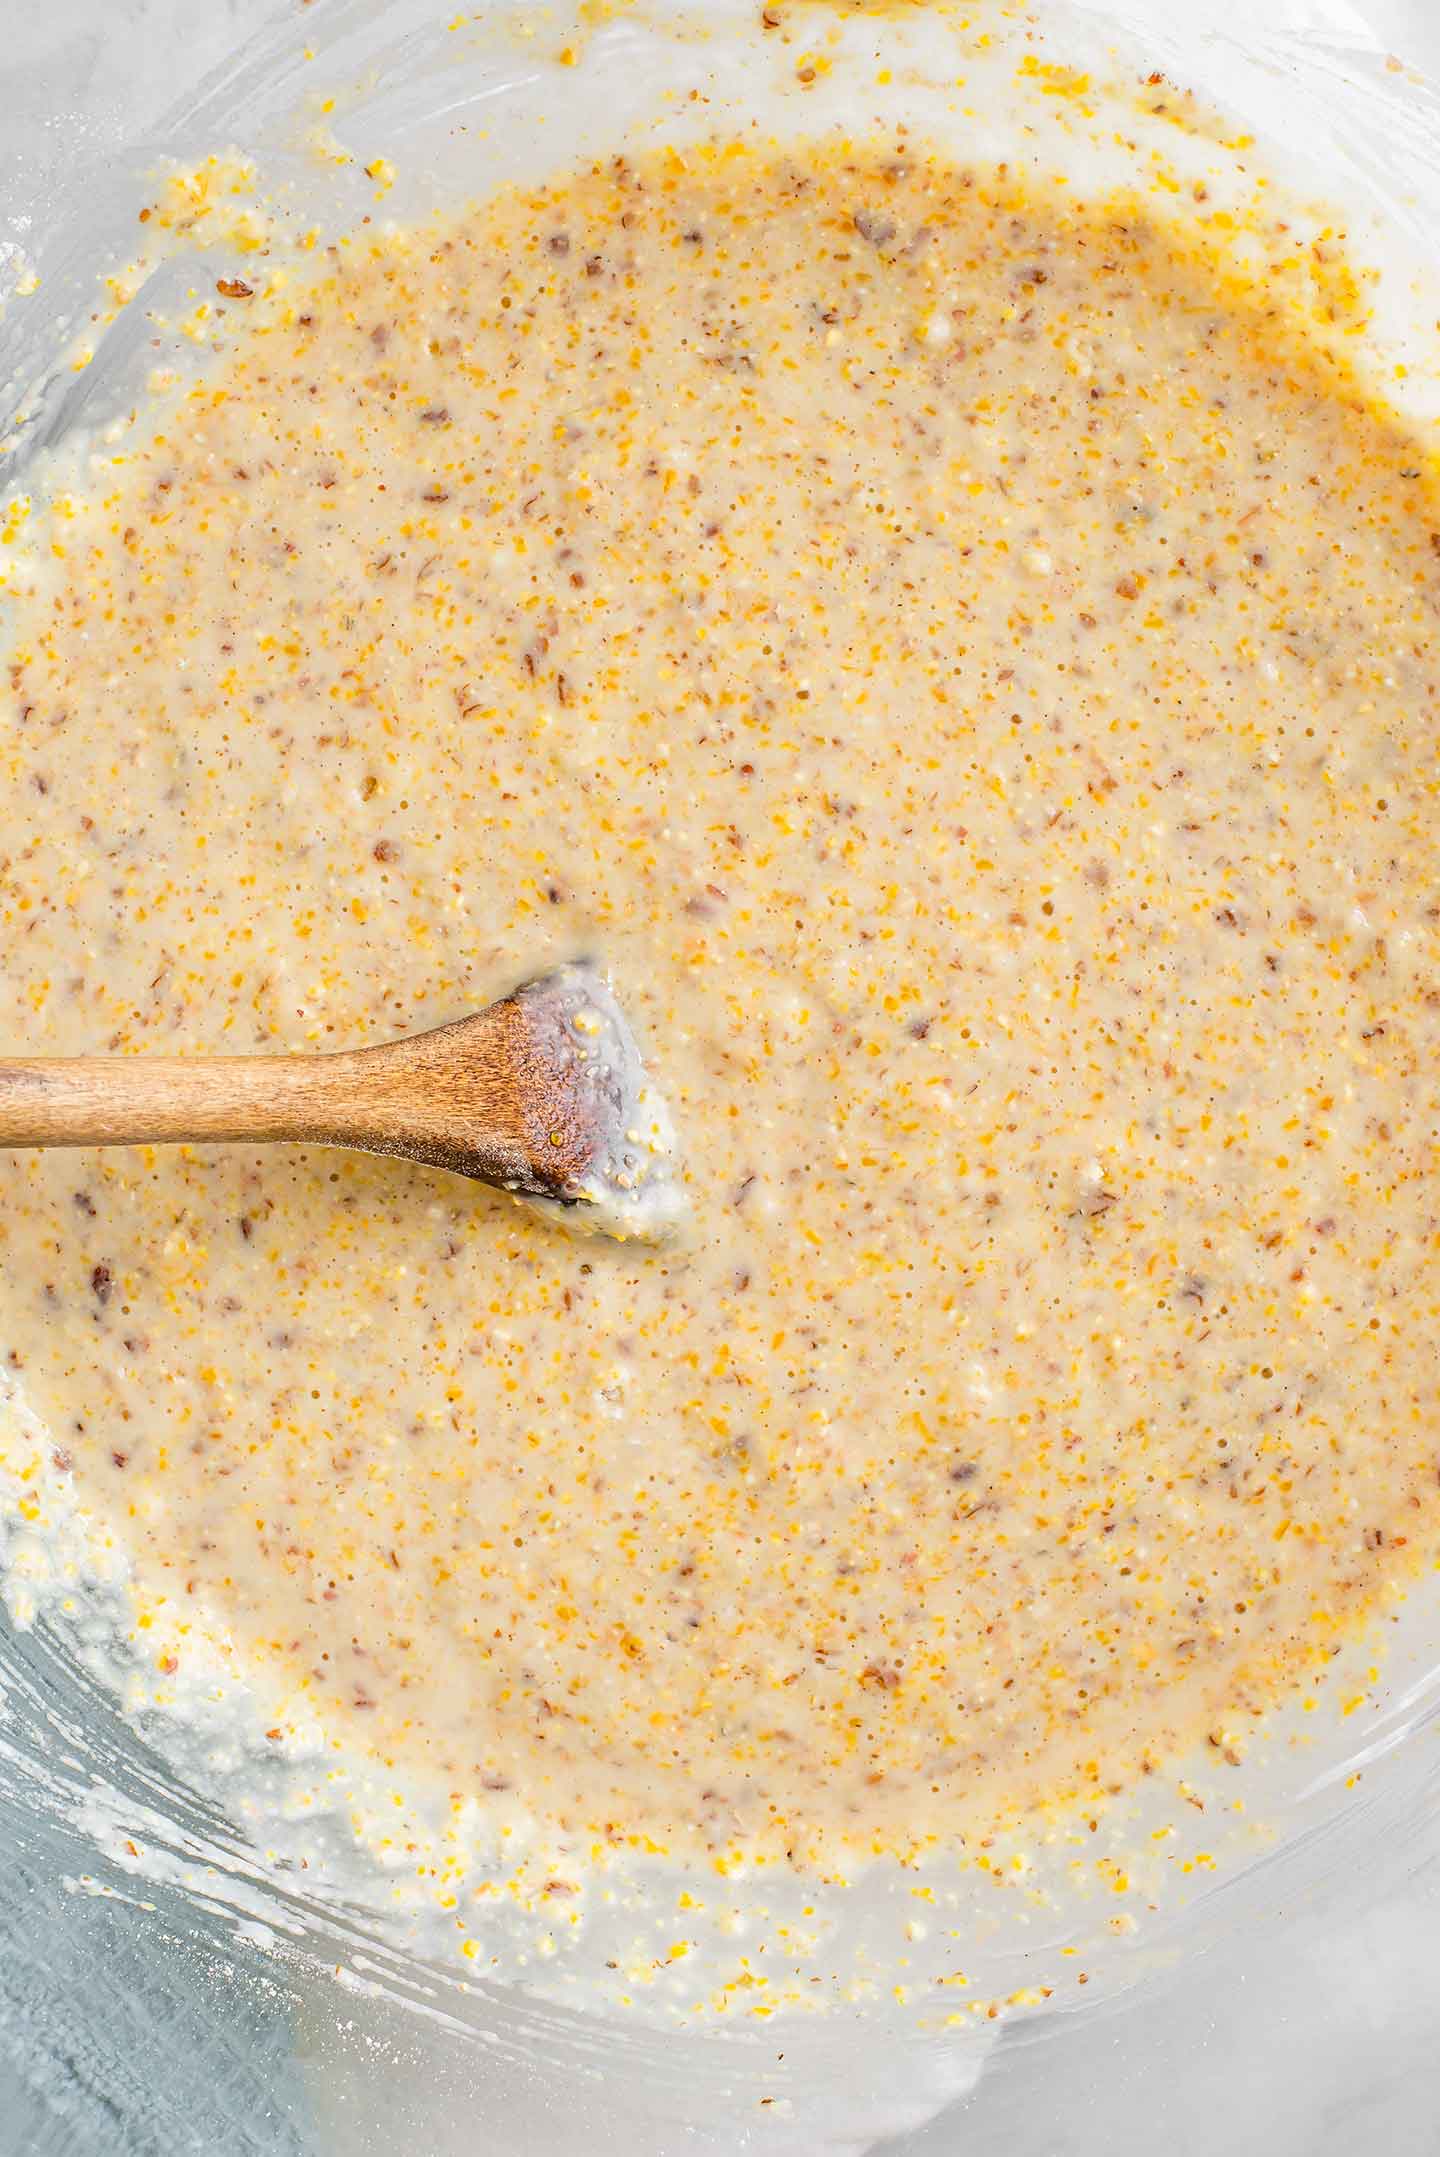 Top down view of cornbread batter being mixed in a large glass bowl.